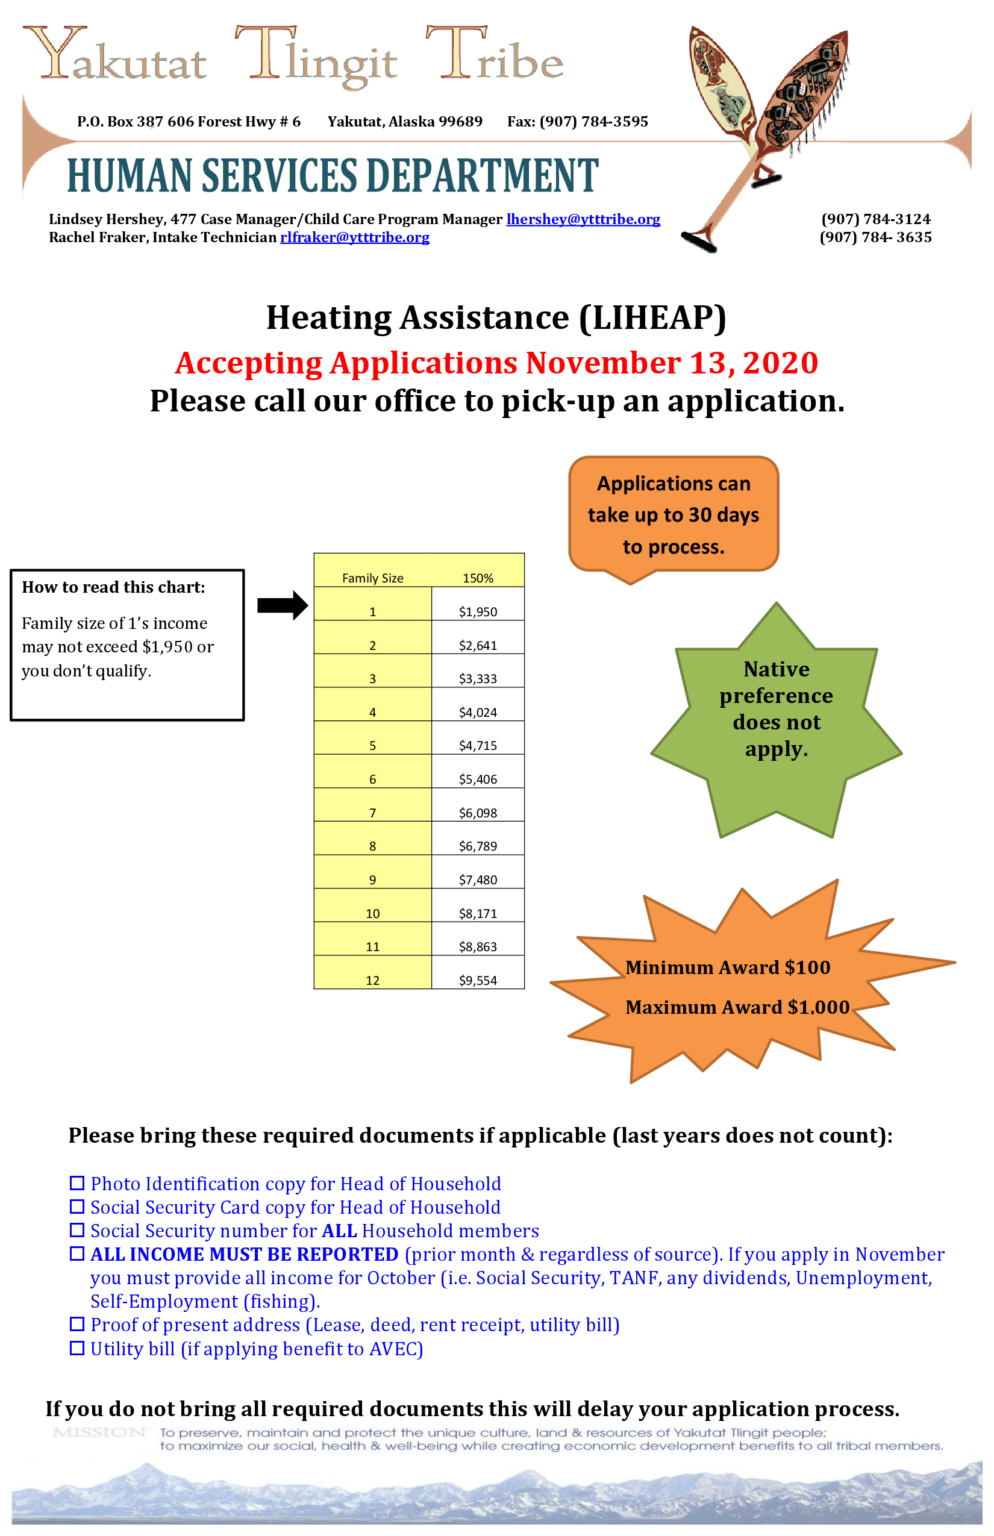 LIHEAP (Heating Assistance Program) Now Accepting Applications!